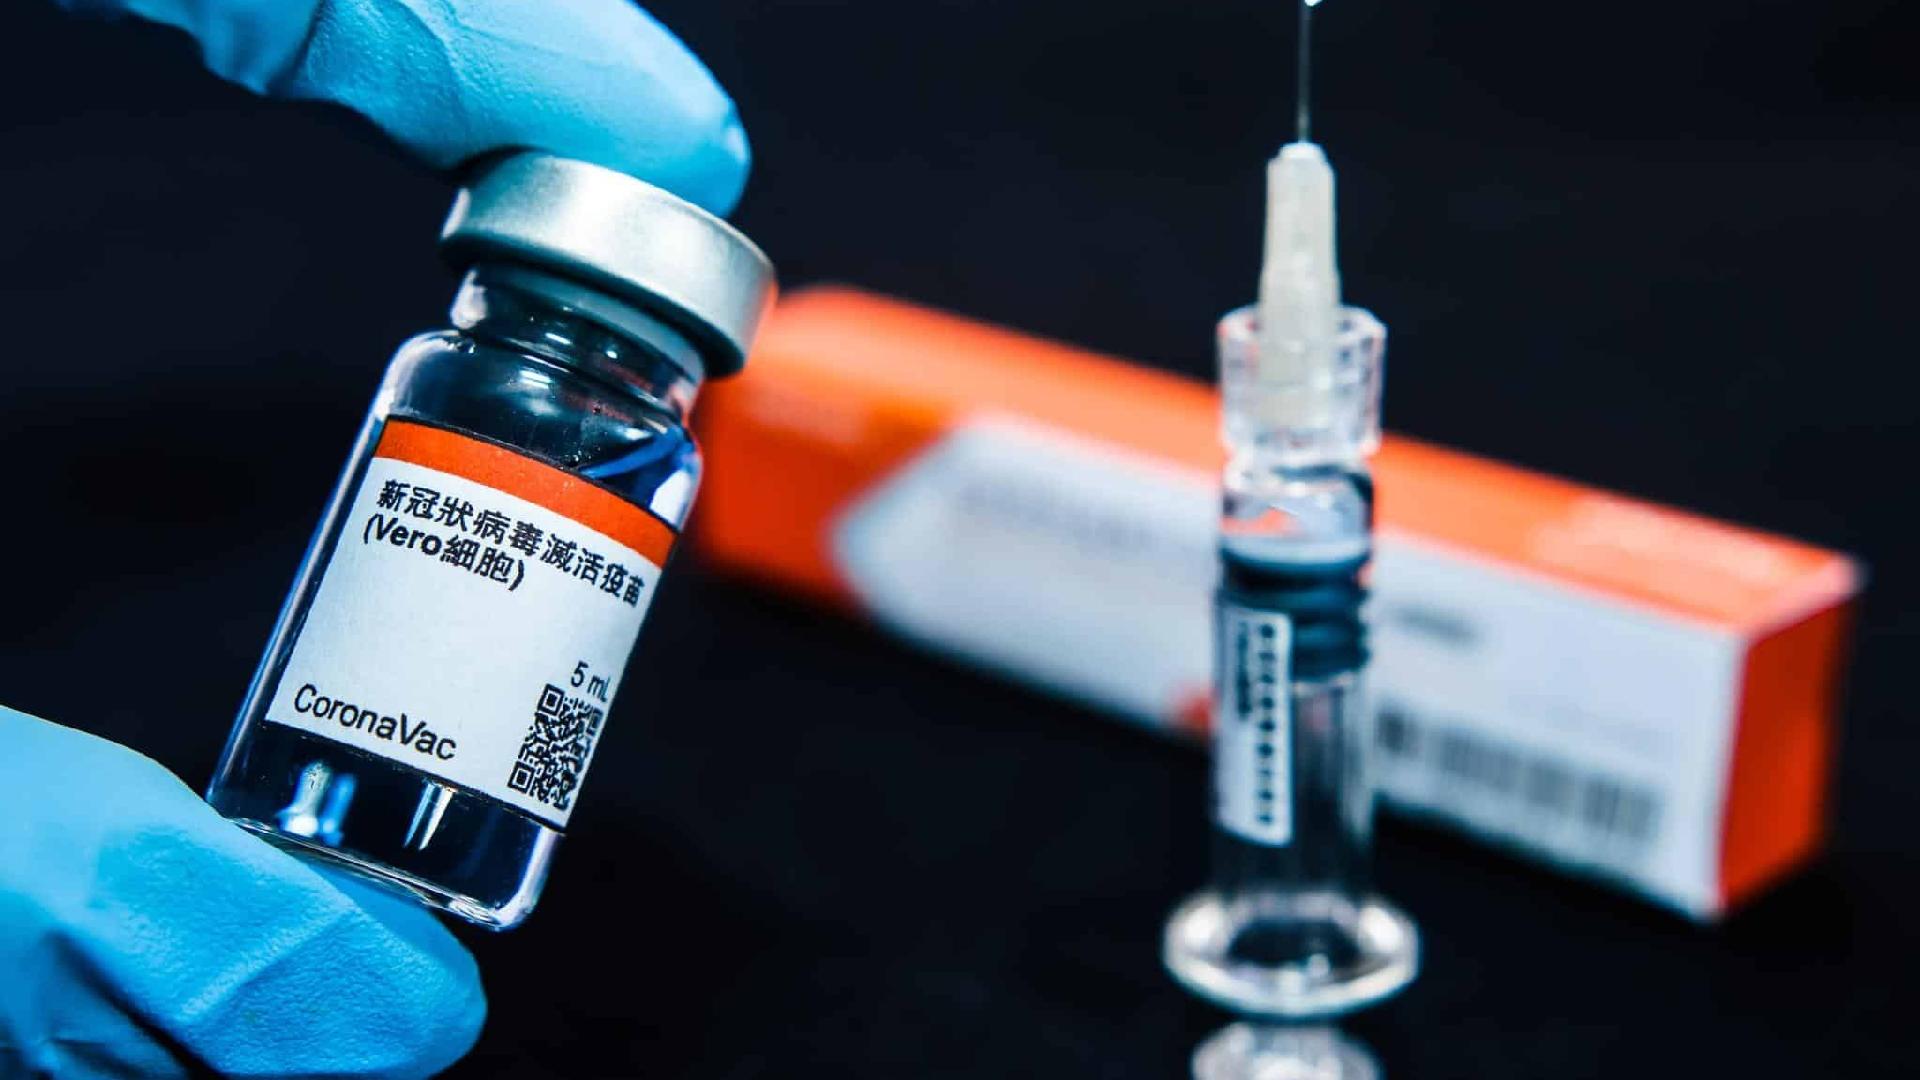 The coronavirus vaccine developed by China’s Sinovac Biotech showed a general efficacy of less than 60% in its late-stage trial in Brazil, a news website reported on Monday, citing two people who seen the results.